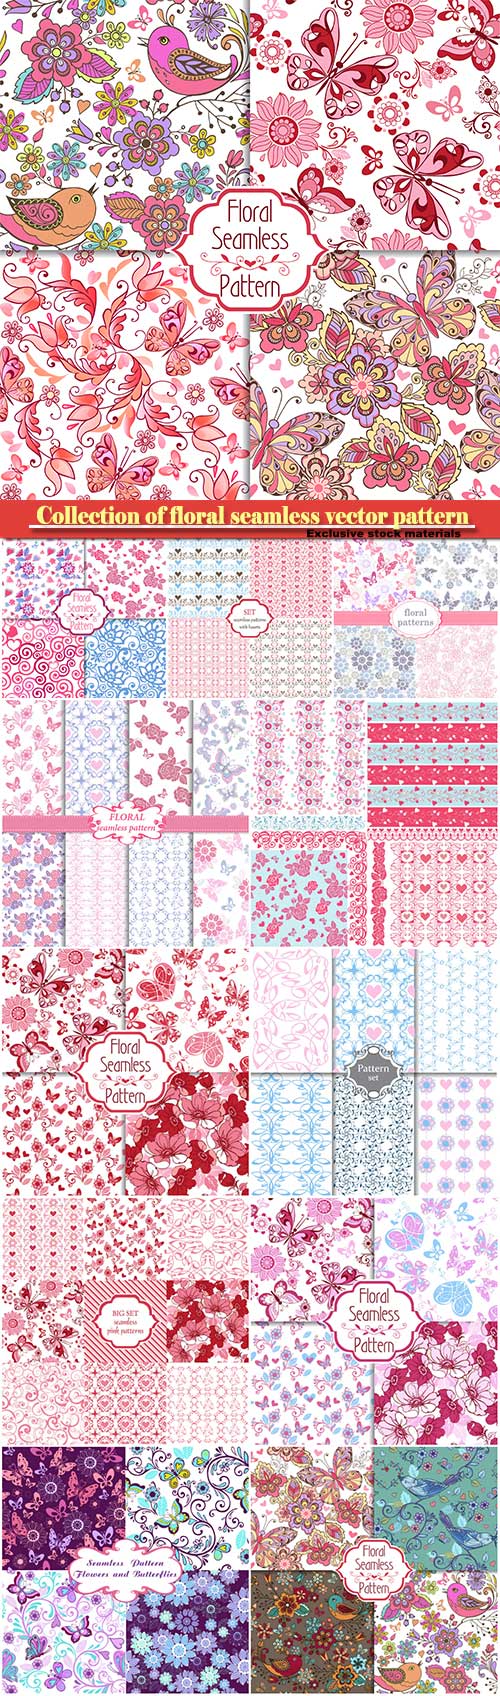 Collection of floral seamless vector pattern with decorative hearts and but ...